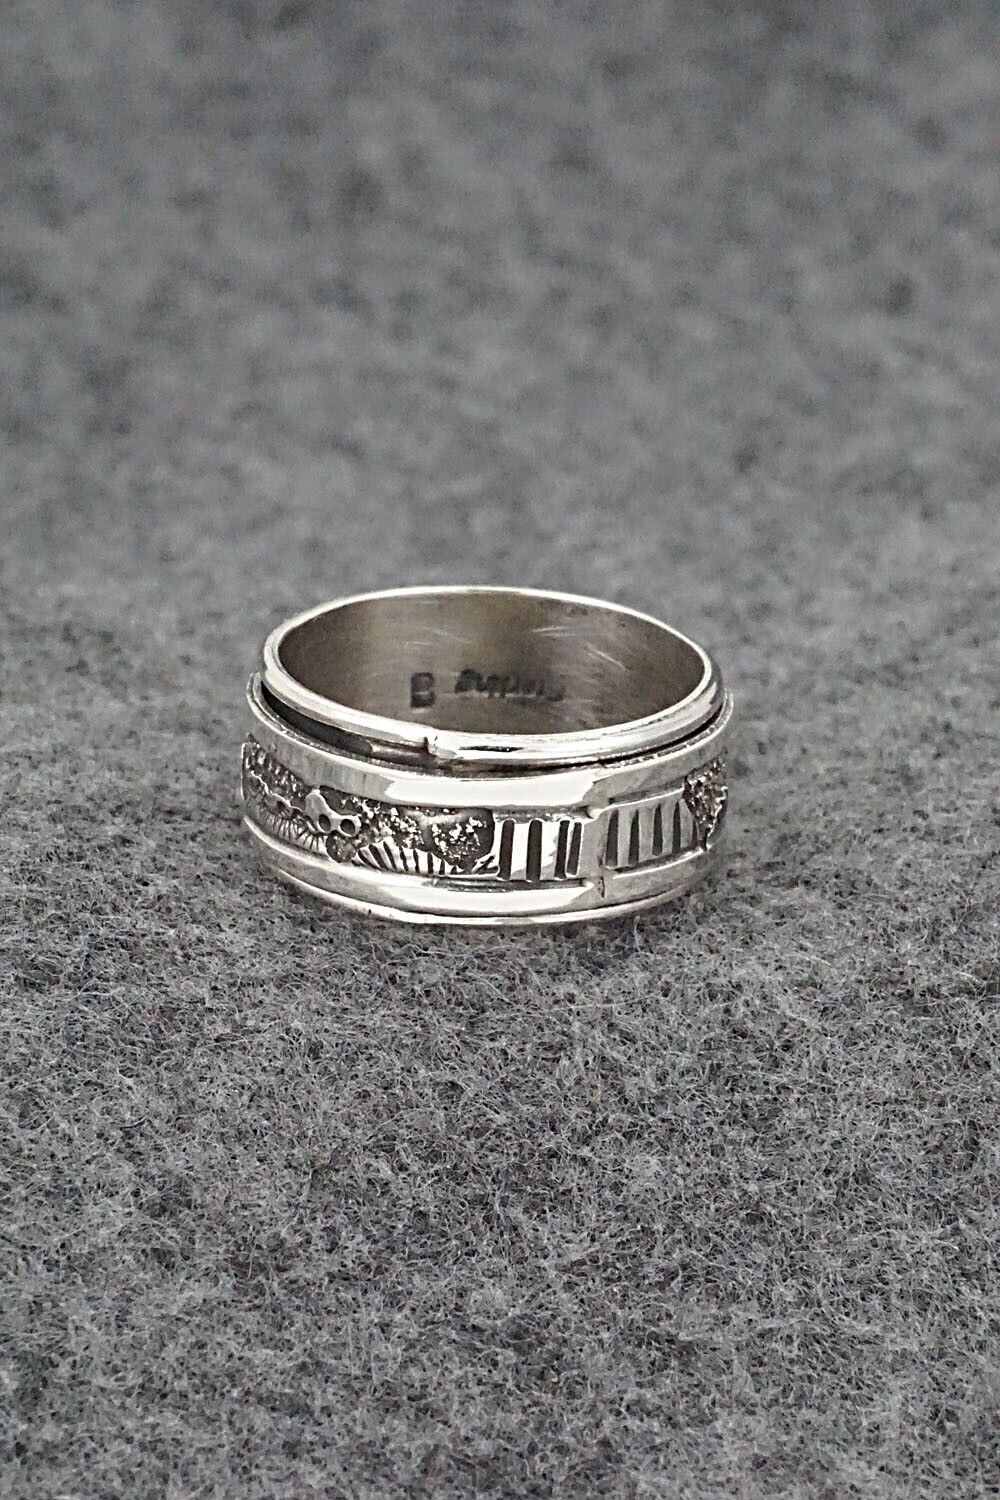 Sterling Silver Spinner Ring - Elaine Becenti - Size 9.75